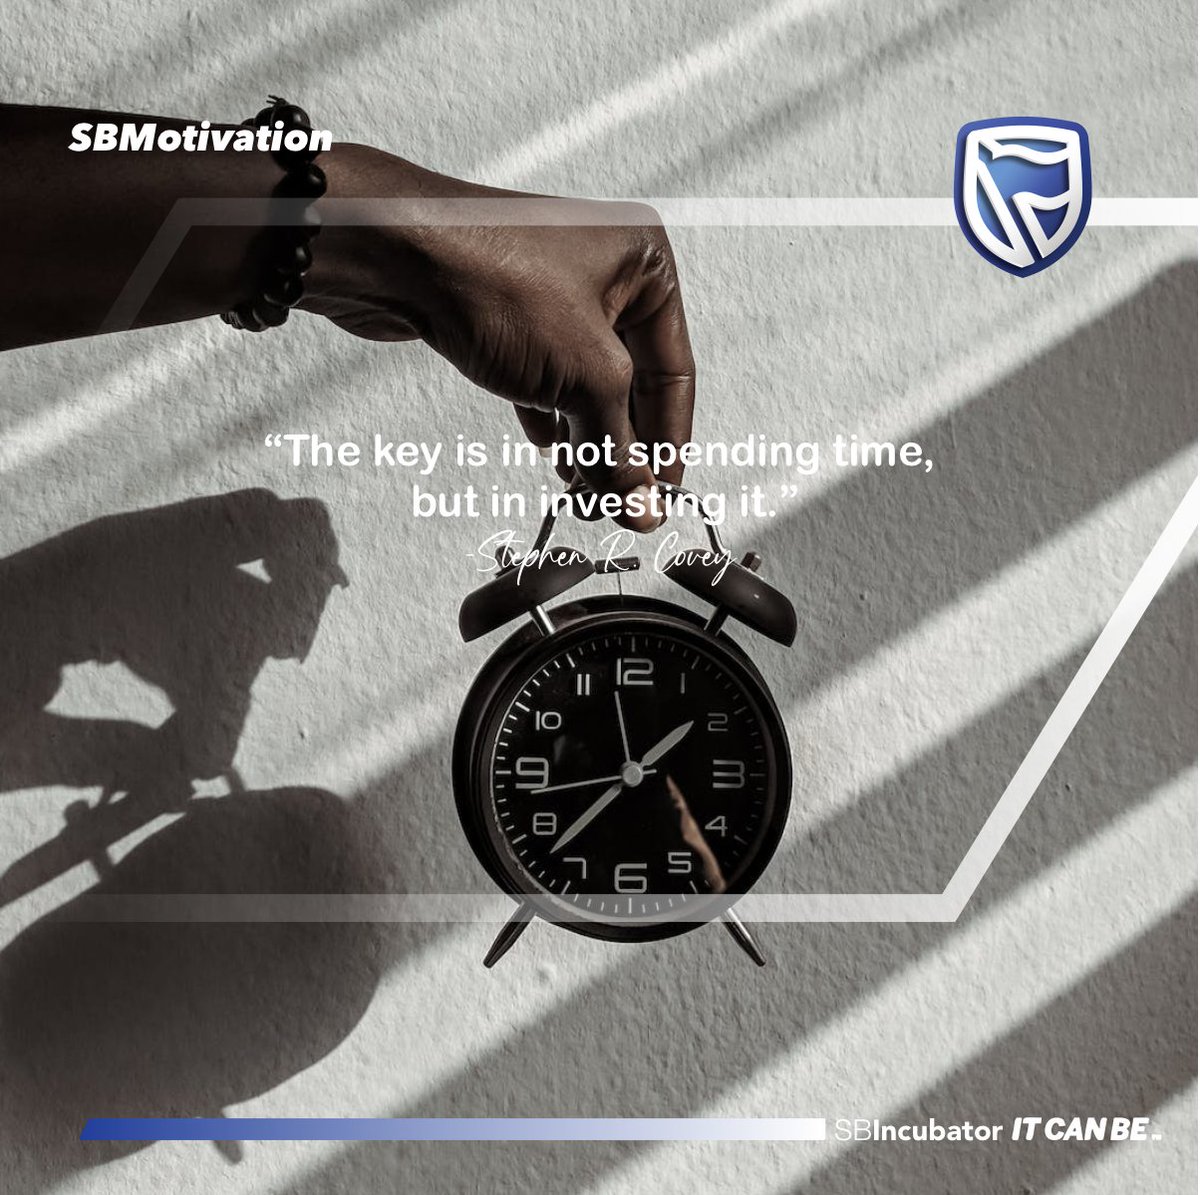 “The key is in not spending time, but in investing it.” -Stephen R. Covey #SBMotivation #SBIncubatorgh #Time